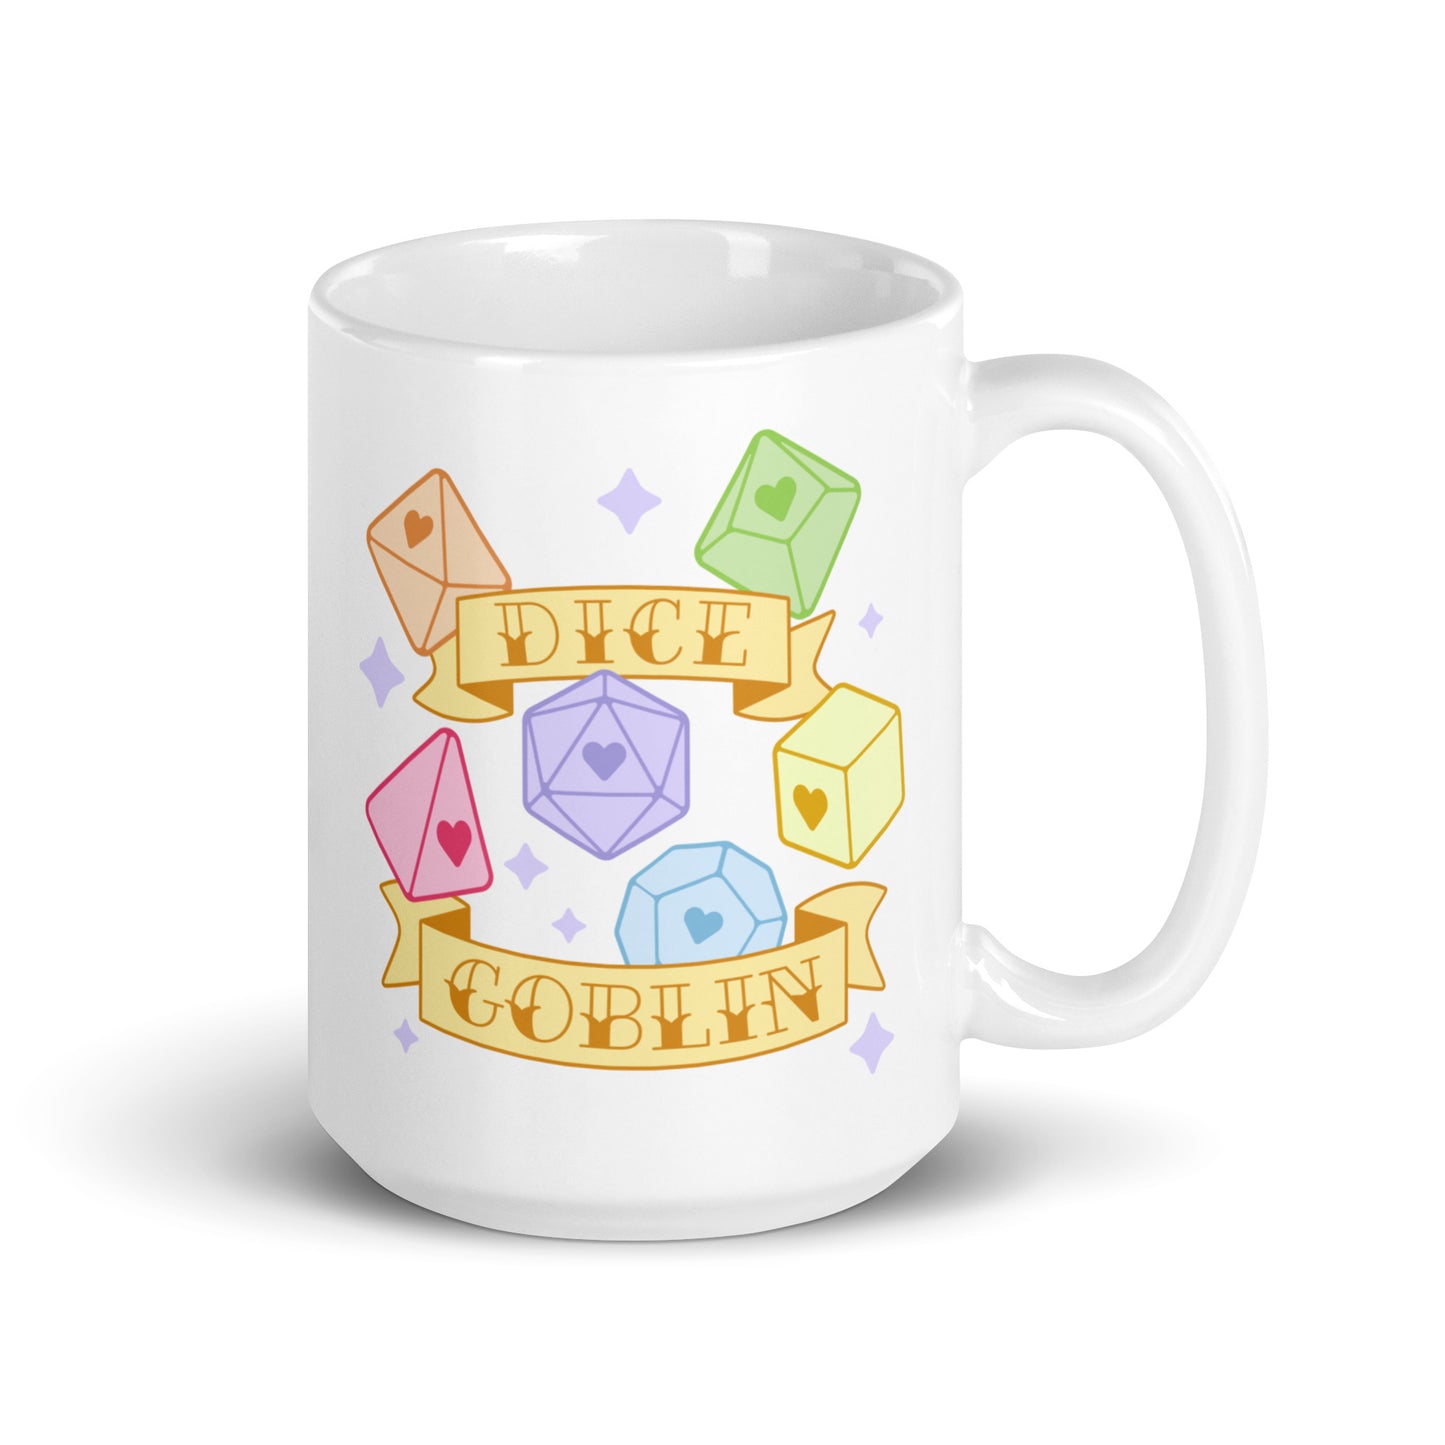 A white 15 ounce ceramic mug featuring an illustration of six polyhedral dice in pastel rainbow colors. Banners surround the dice. Text on the banners reads "Dice Goblin"